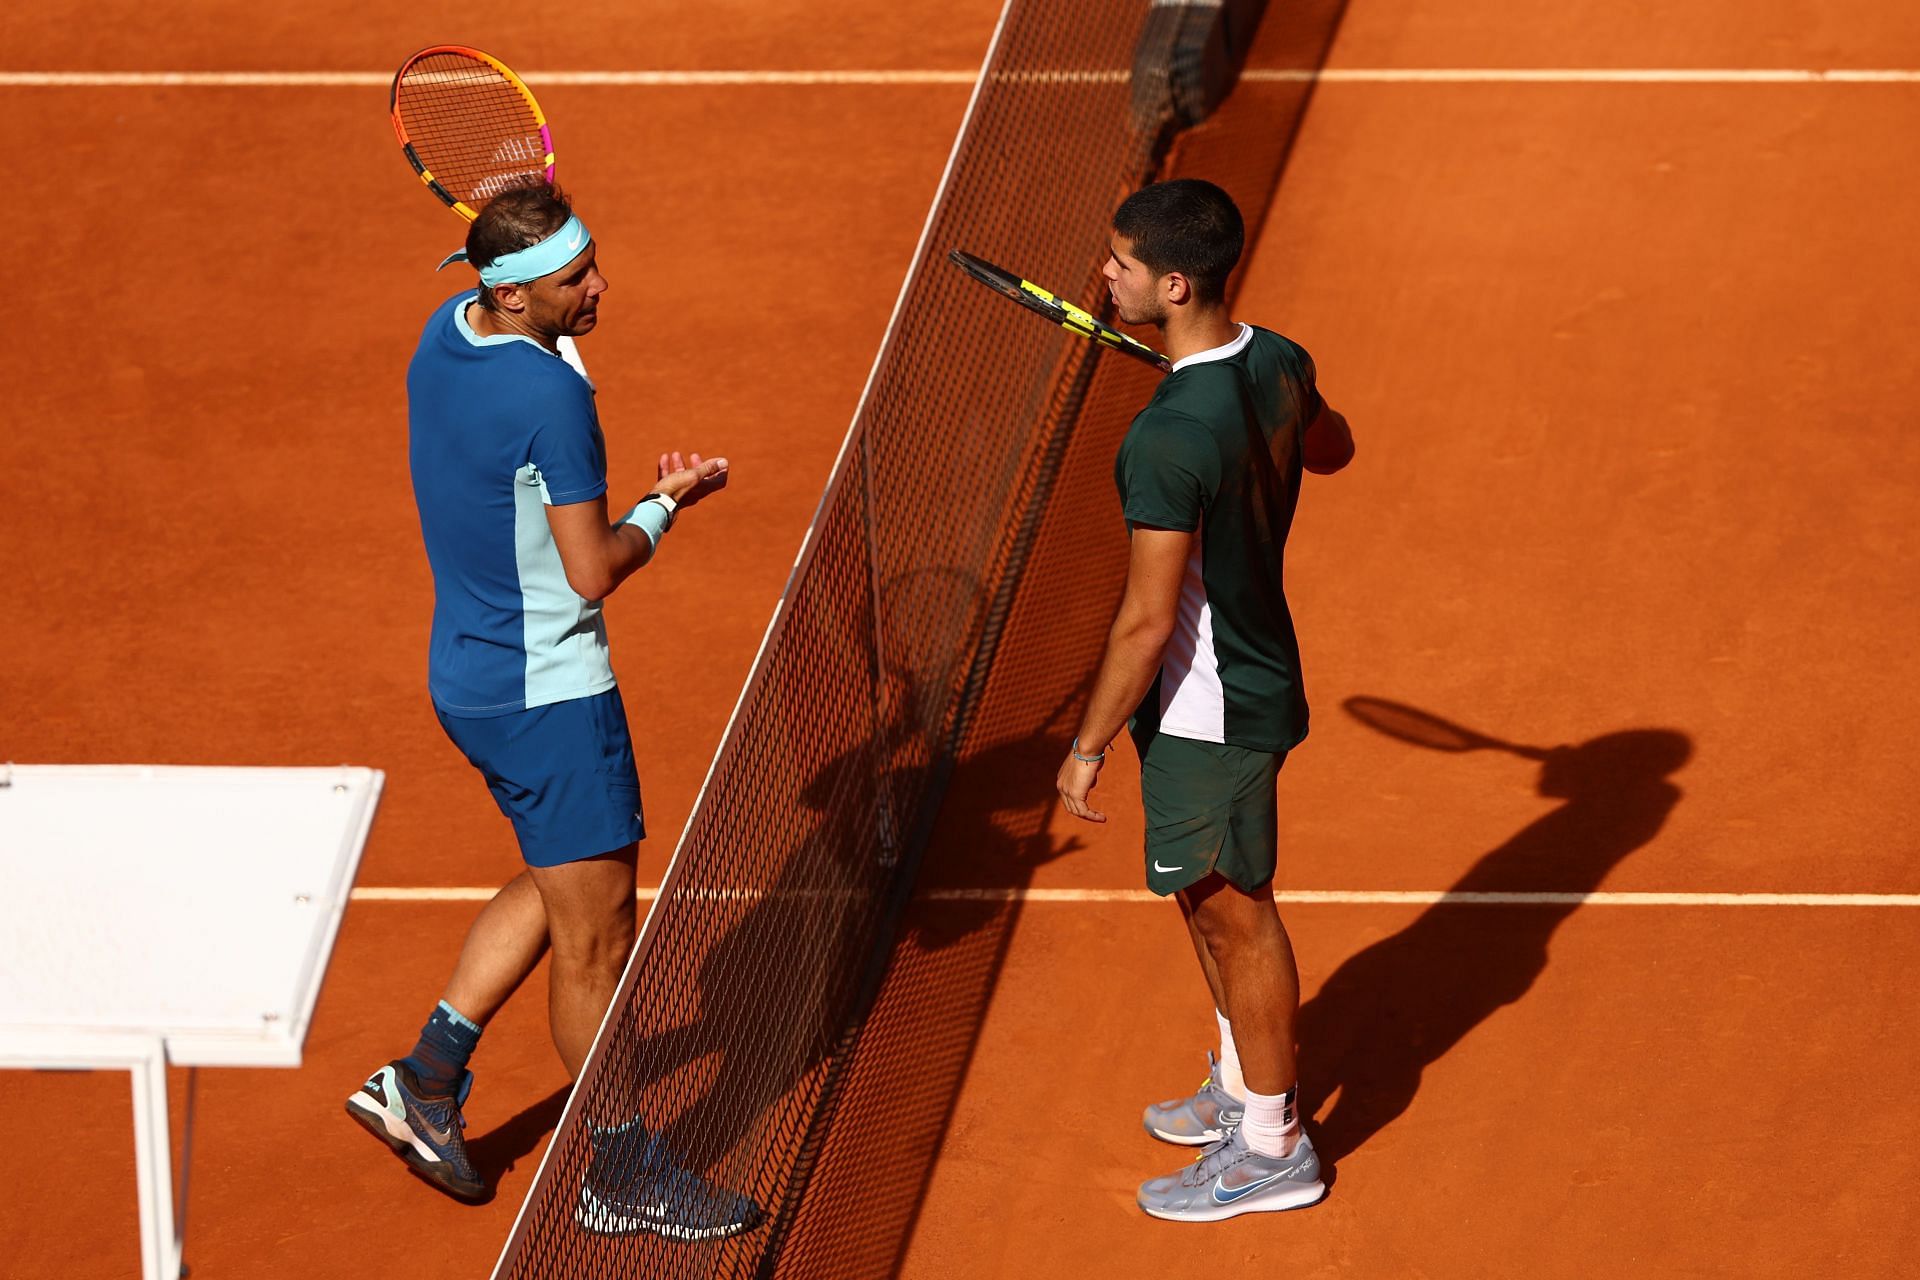 Rafael Nadal in conversation with Carlos Alcaraz at the Madrid Open.